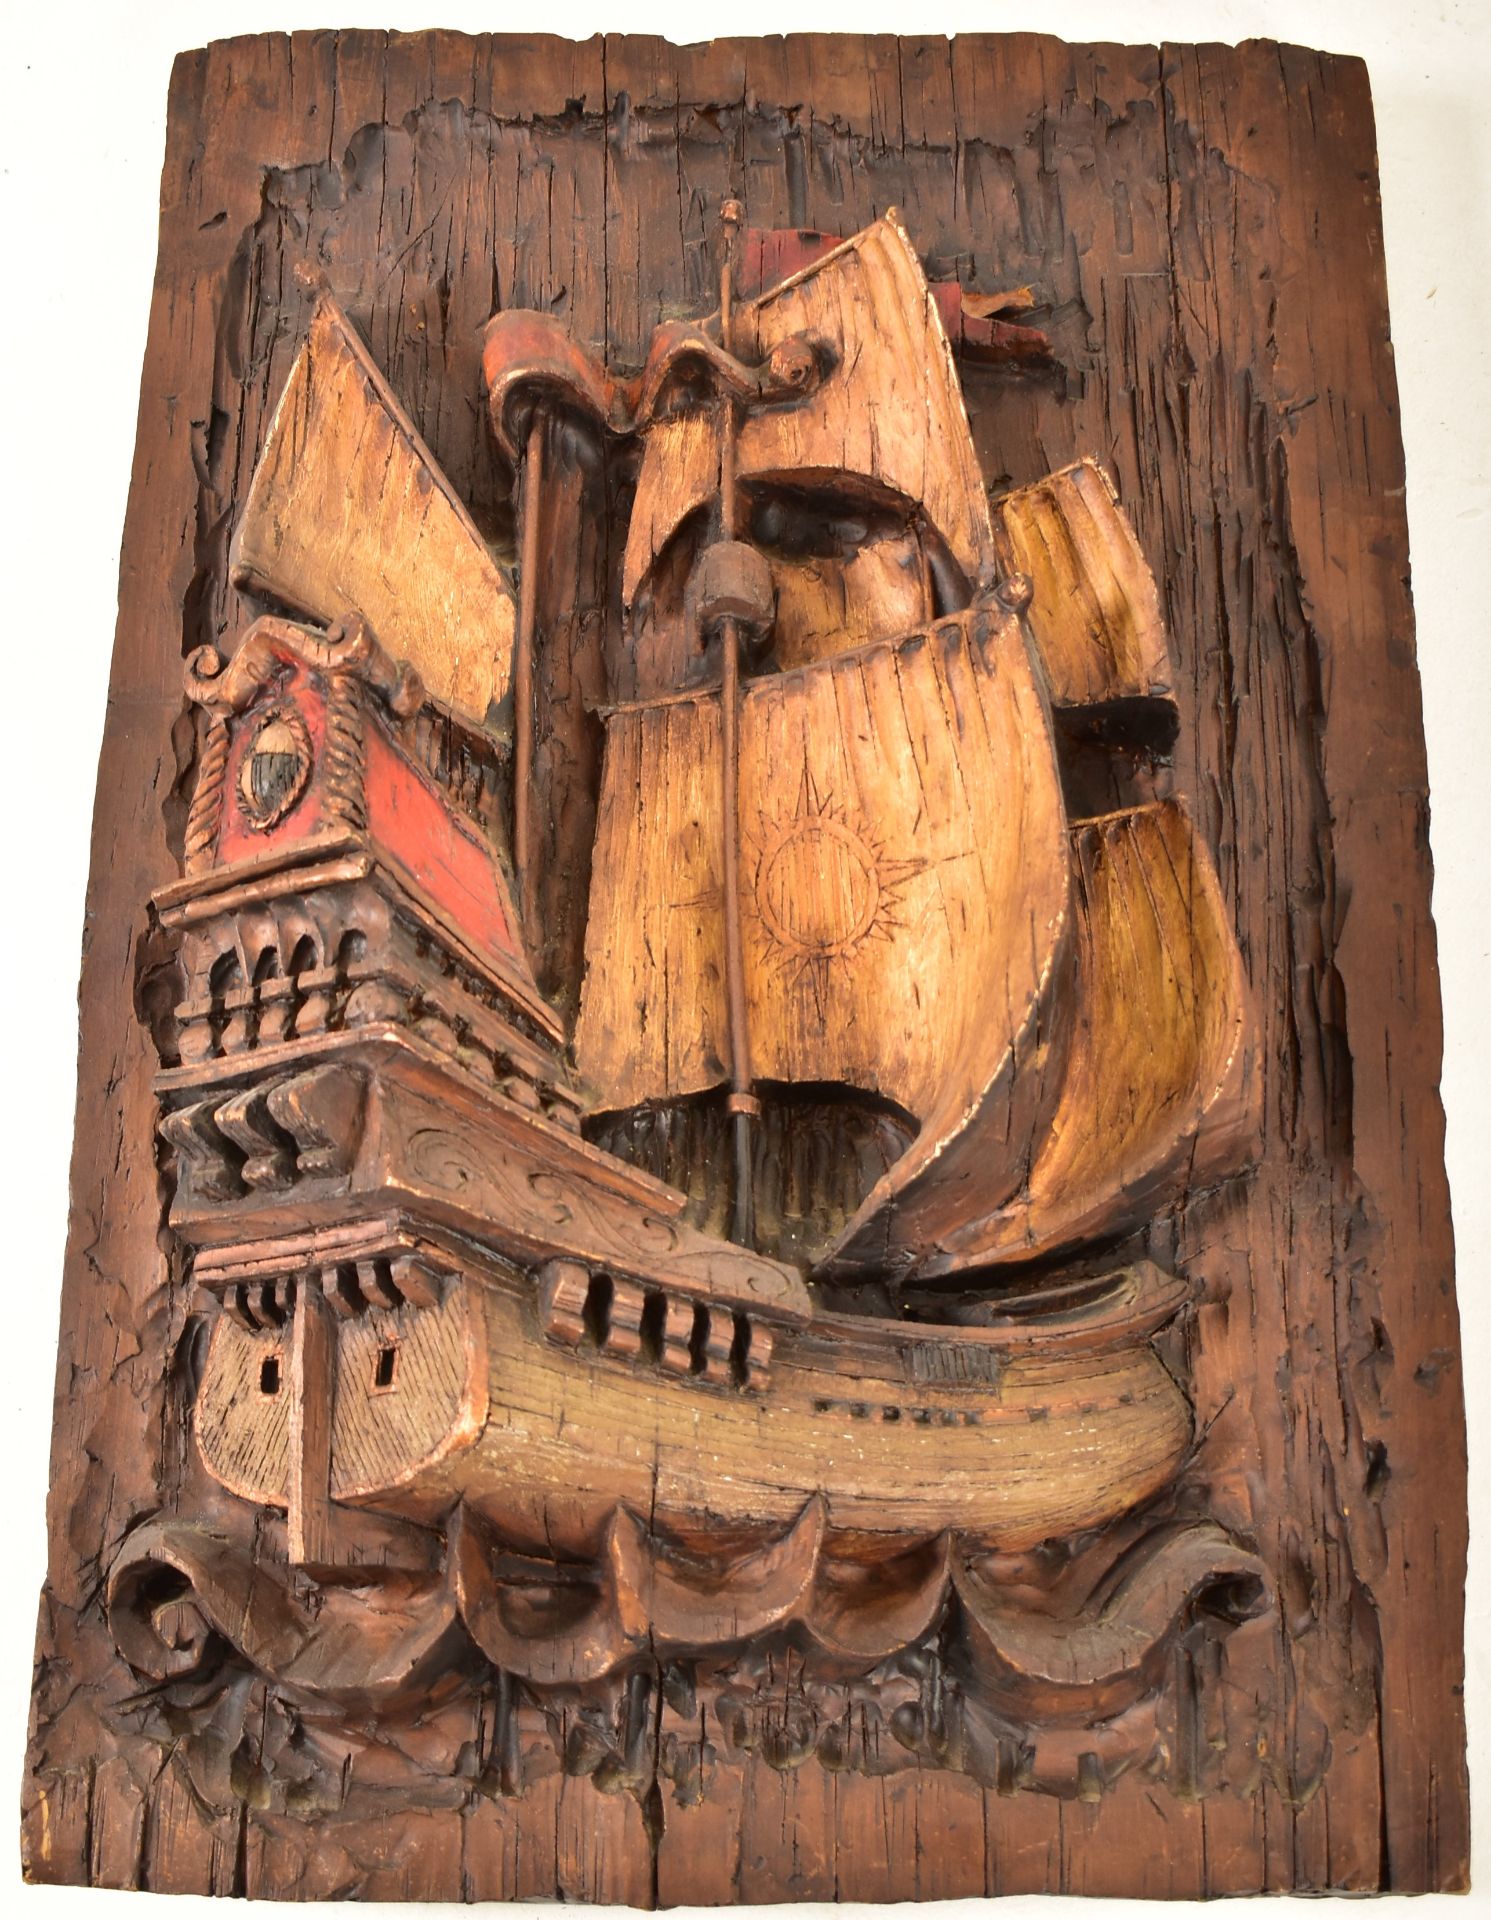 VANGUARD STUDIOS - SET OF FOUR COMPOSITION CARVINGS - Image 4 of 6